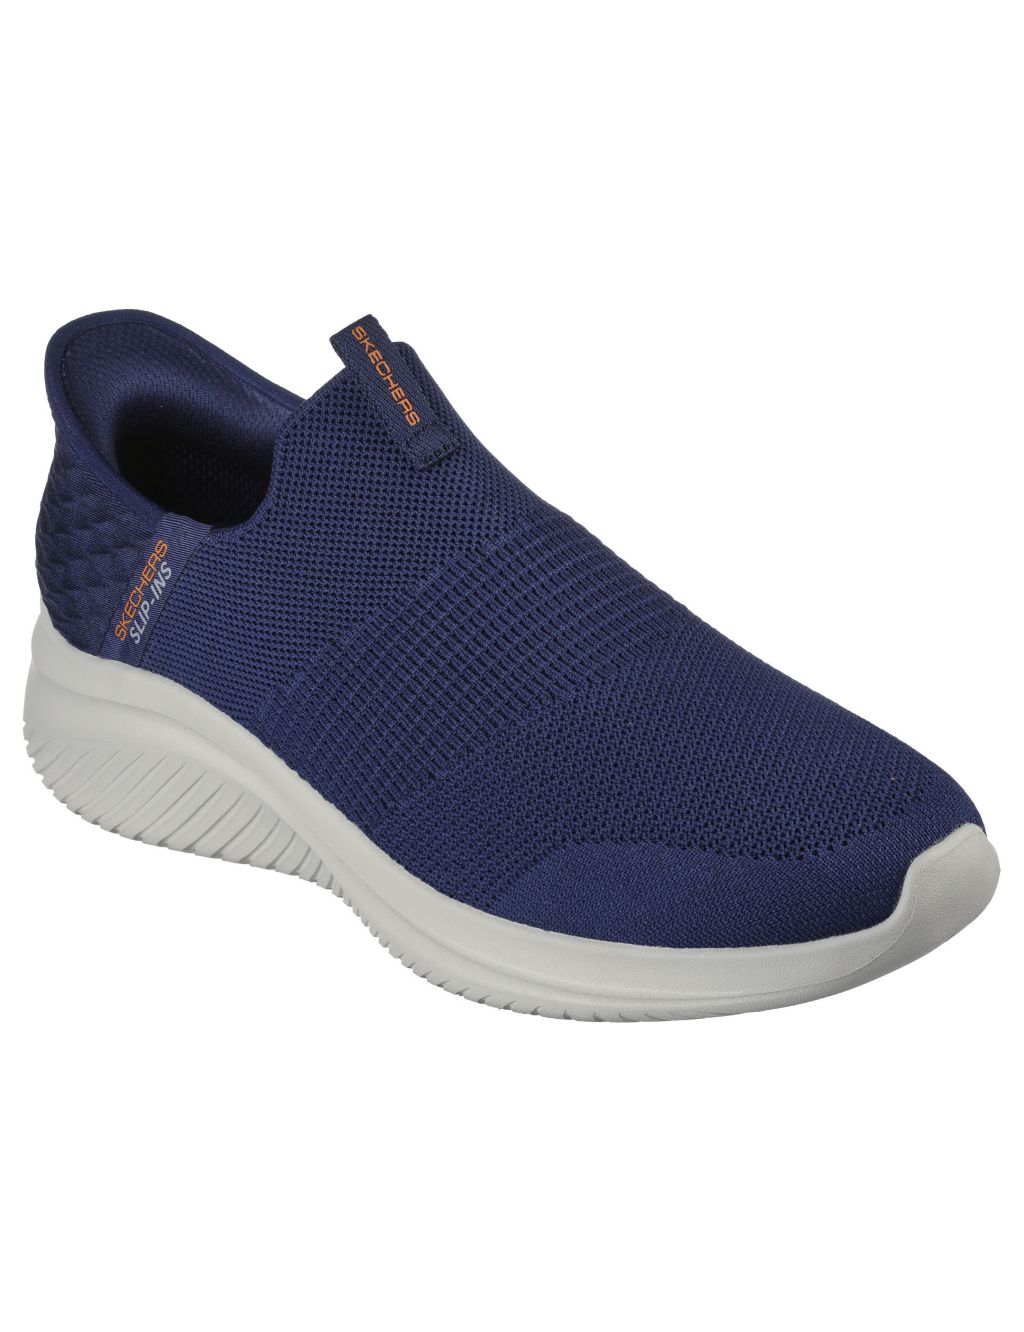 Ultra Flex 3.0 Smooth Step Wide Fit Trainers image 2